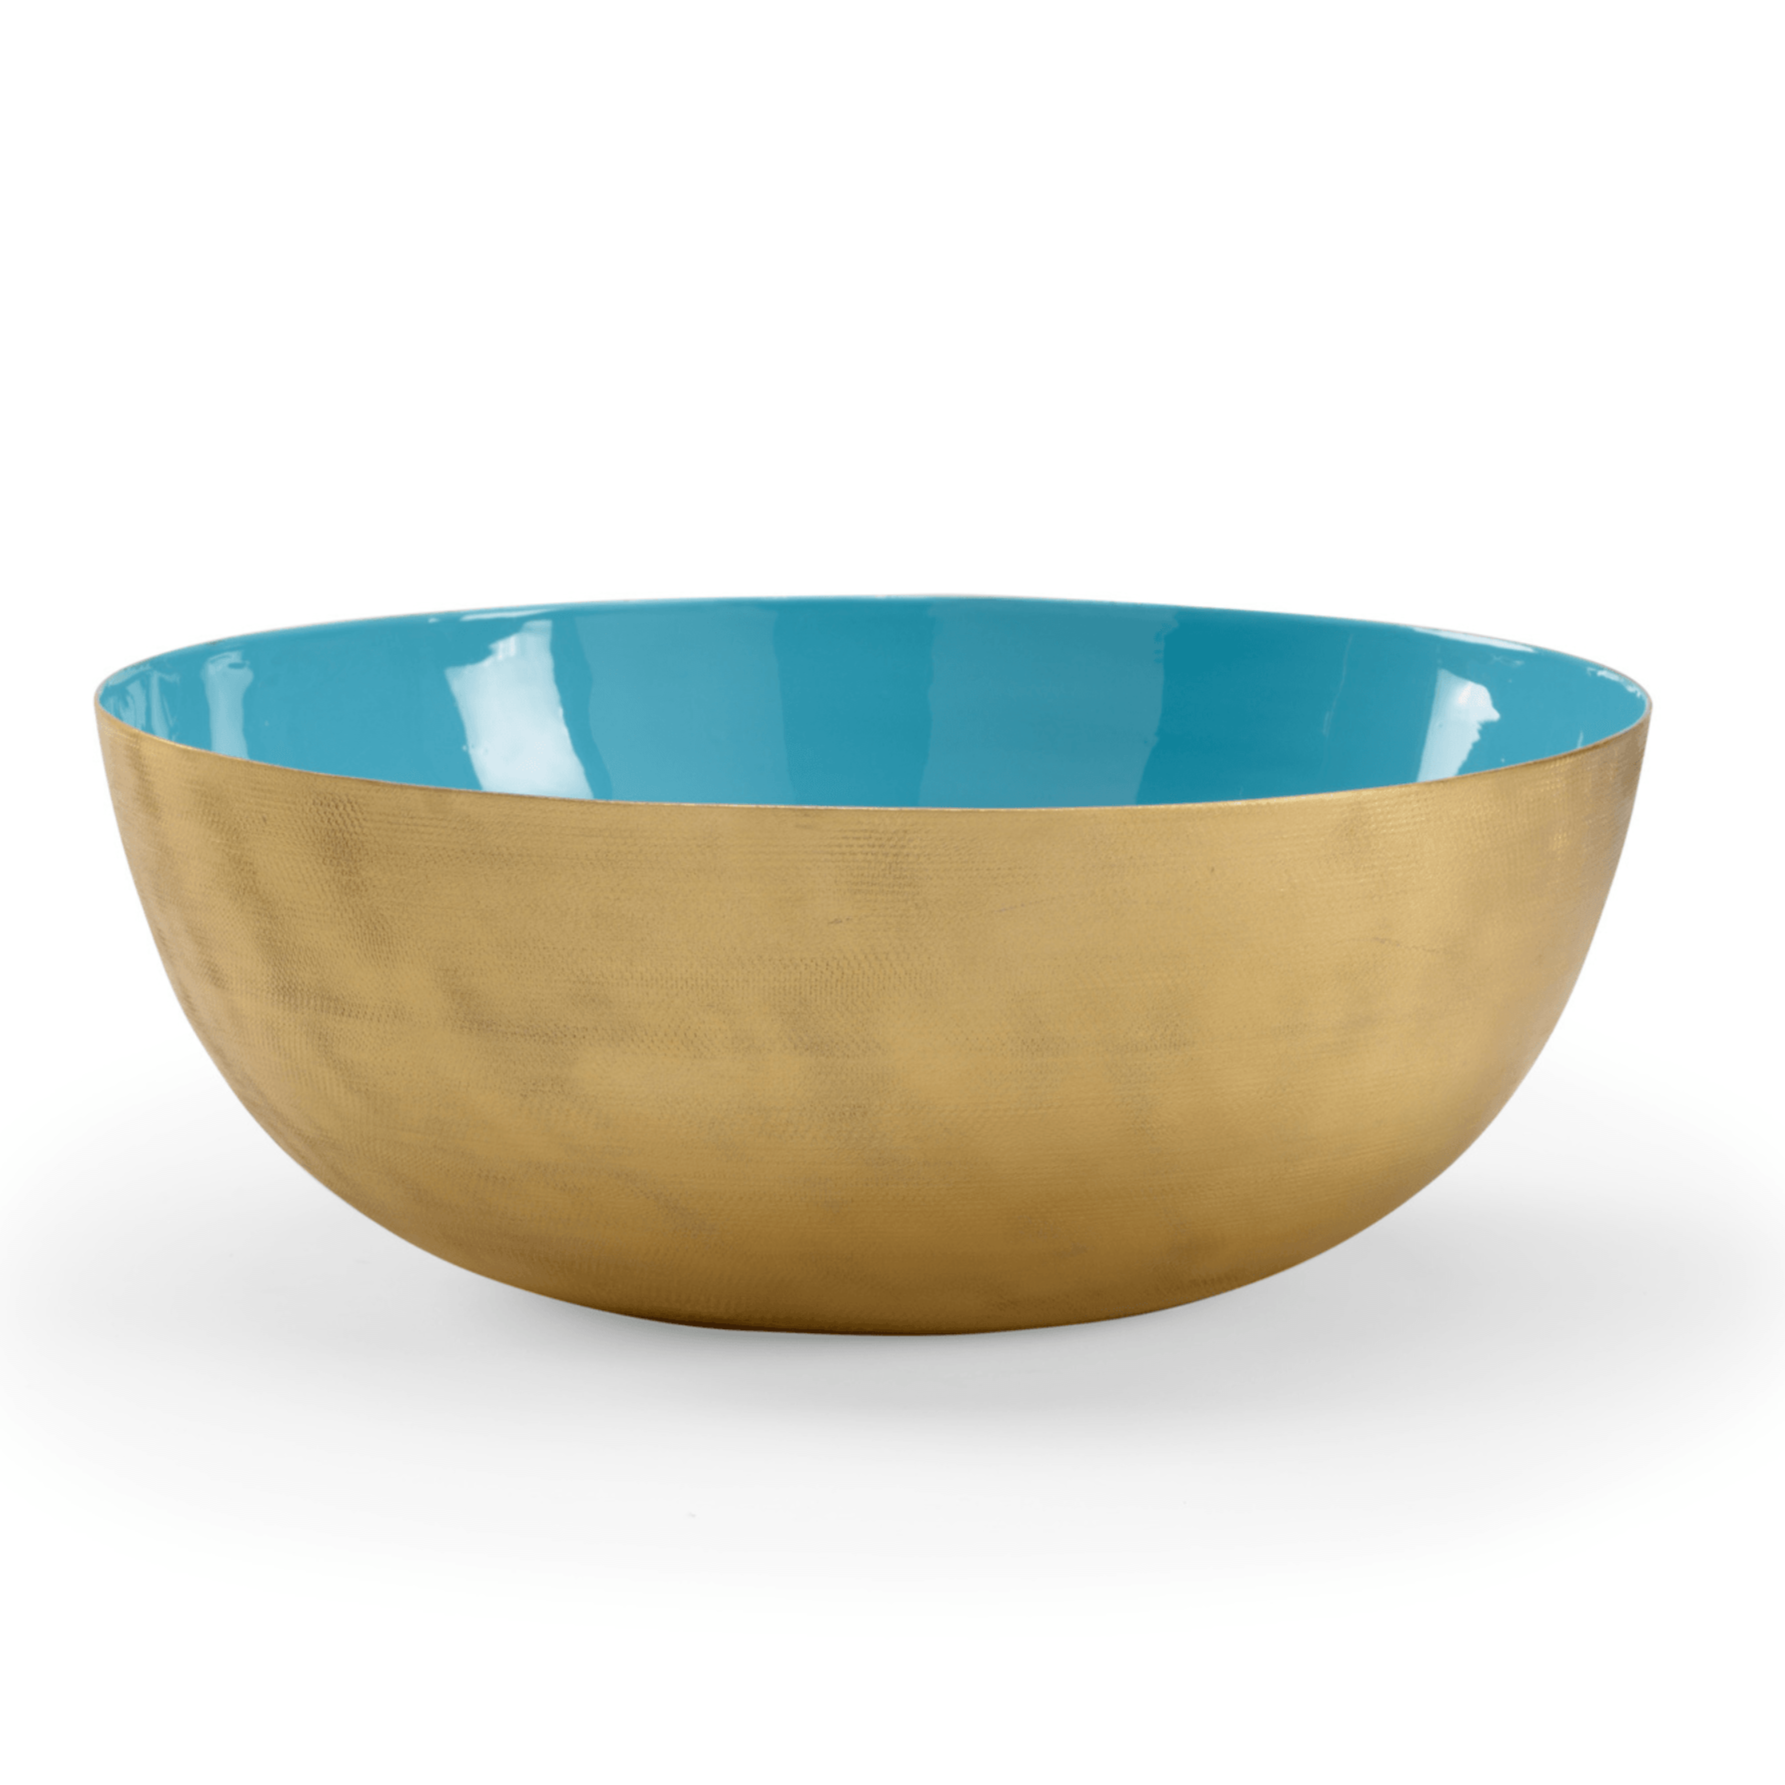 Large Caribbean Textured Bowl - Fairley Fancy 